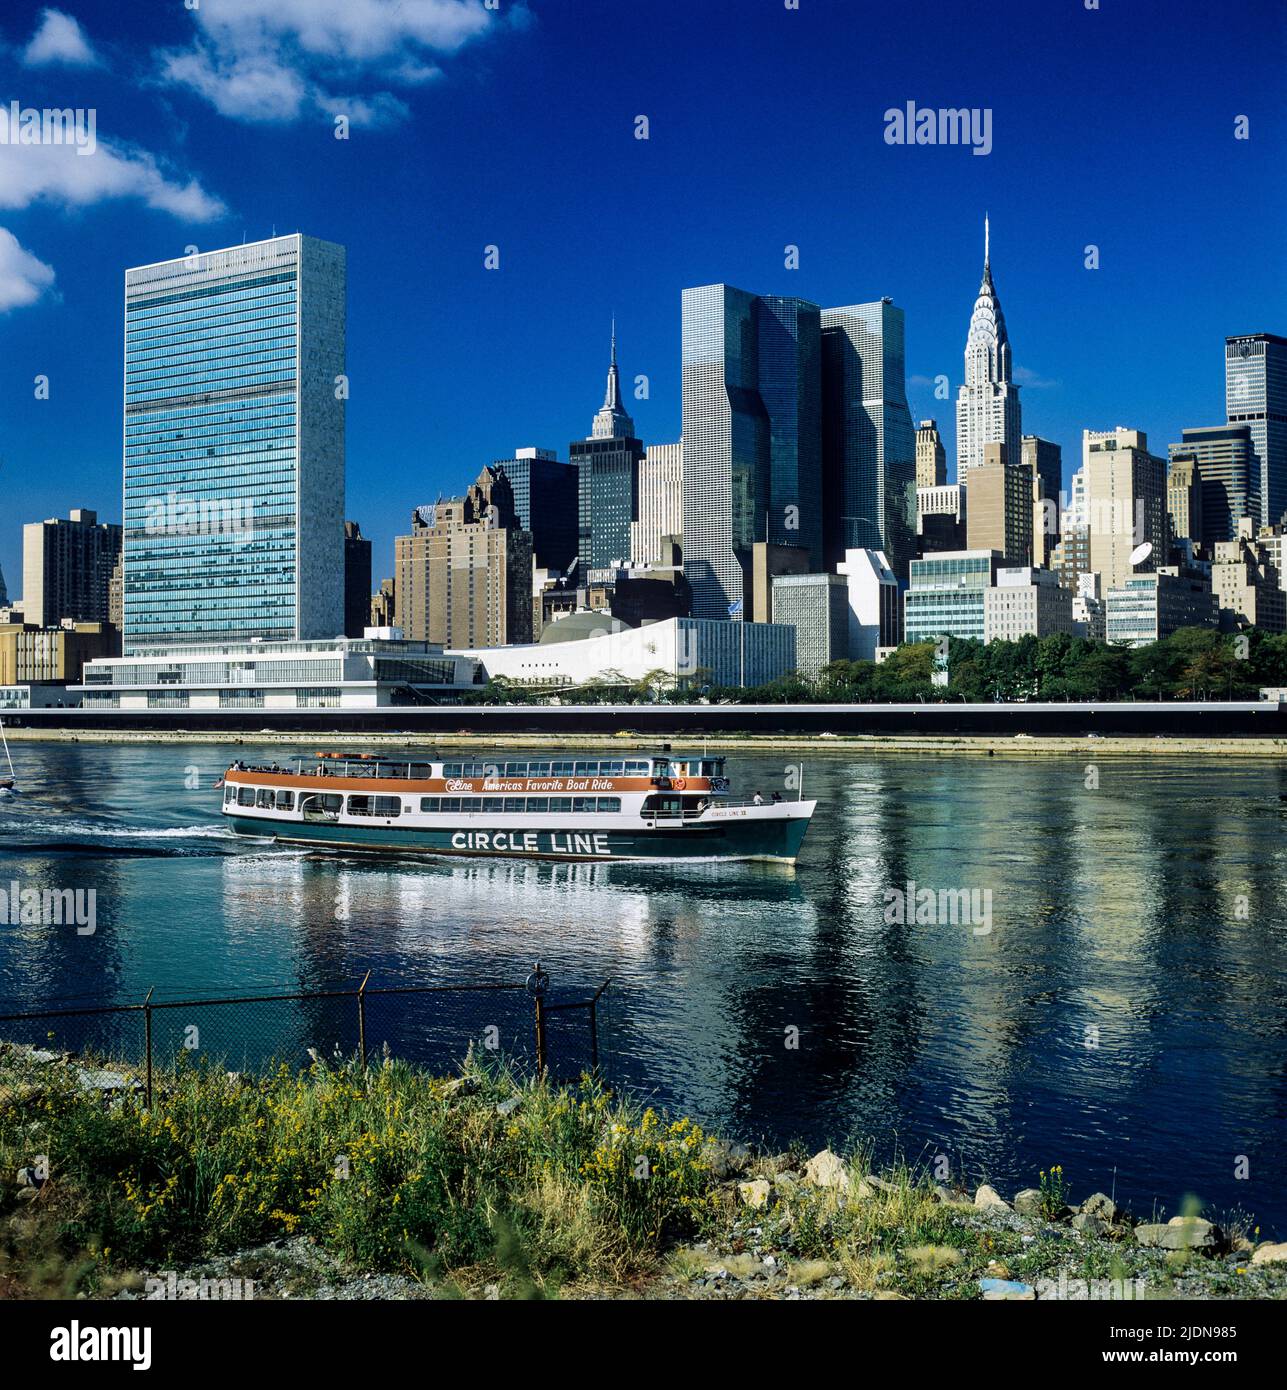 New York 1980s, East river, Circle Line cruise boat, UN United Nations, Chrysler building, midtown Manhattan skyline, New York City, NYC, NY, USA, Stock Photo